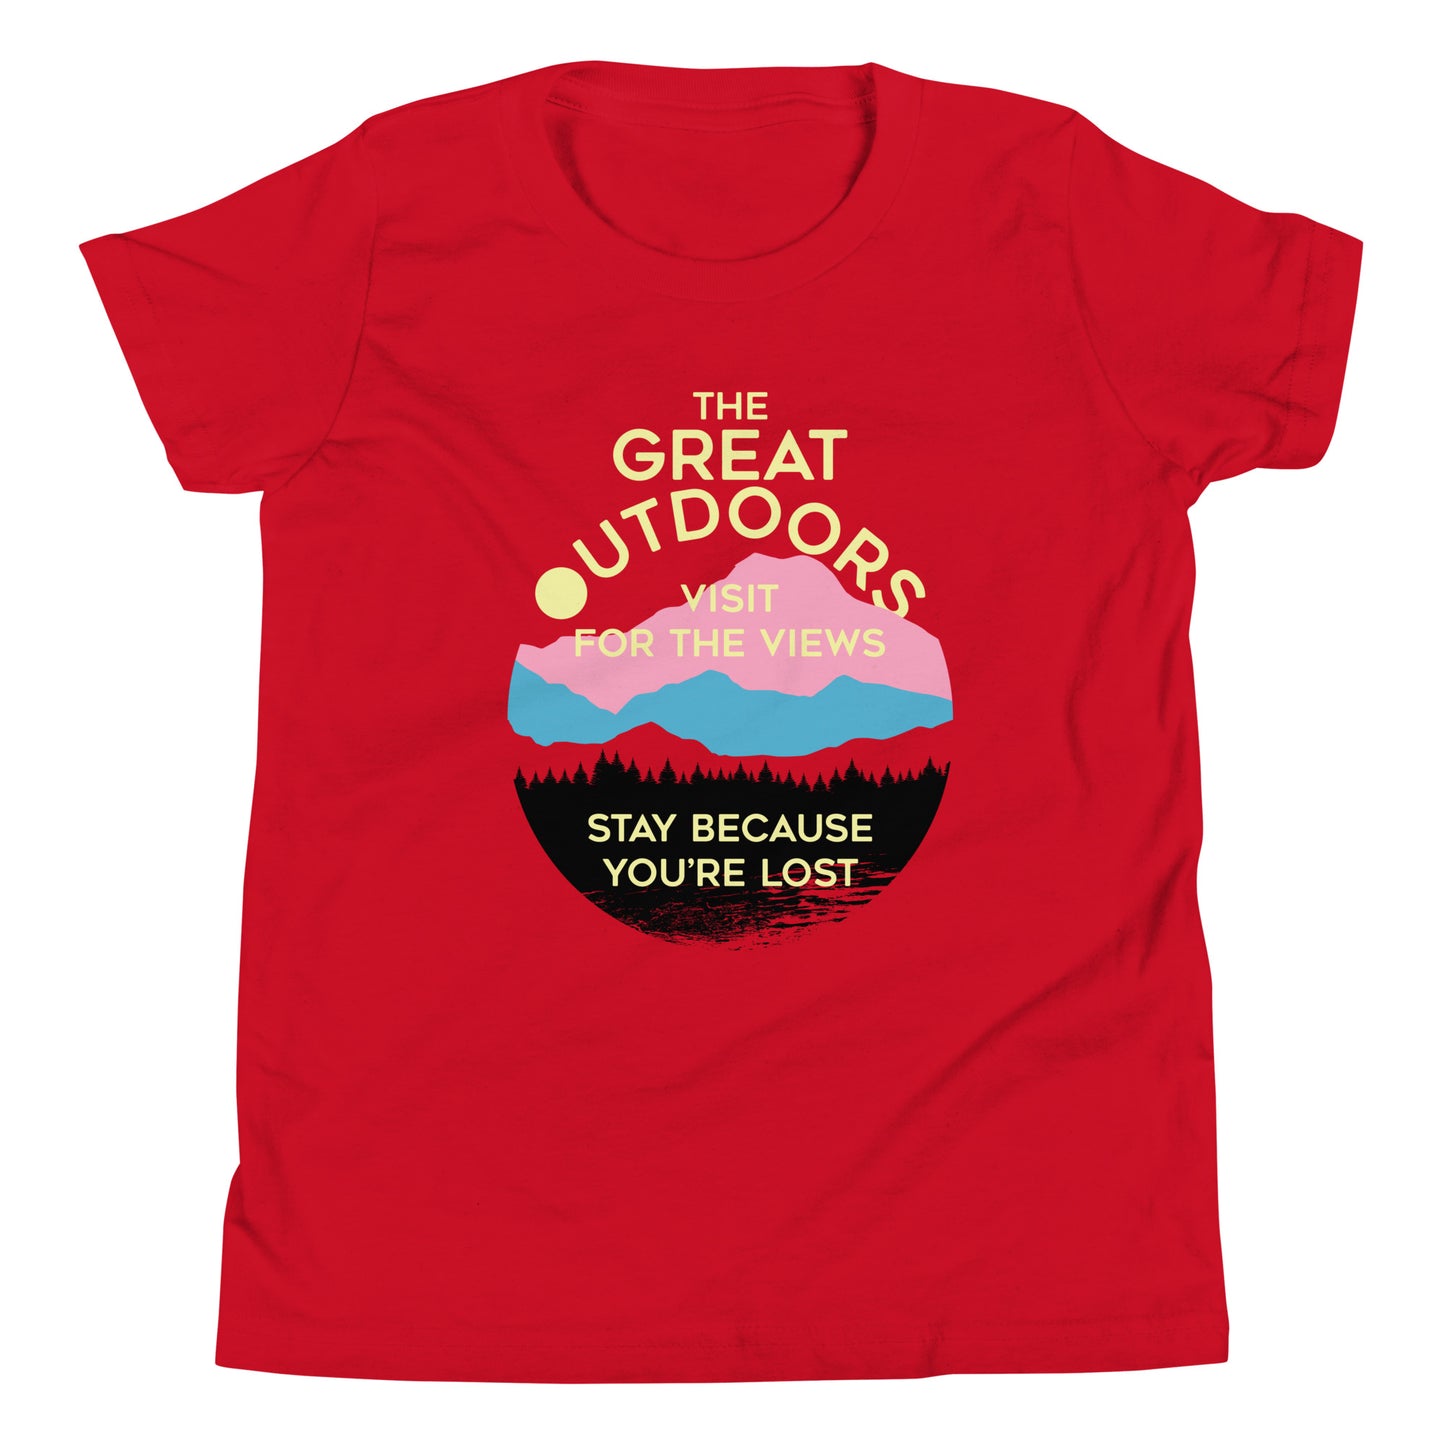 The Great Outdoors Kid's Youth Tee